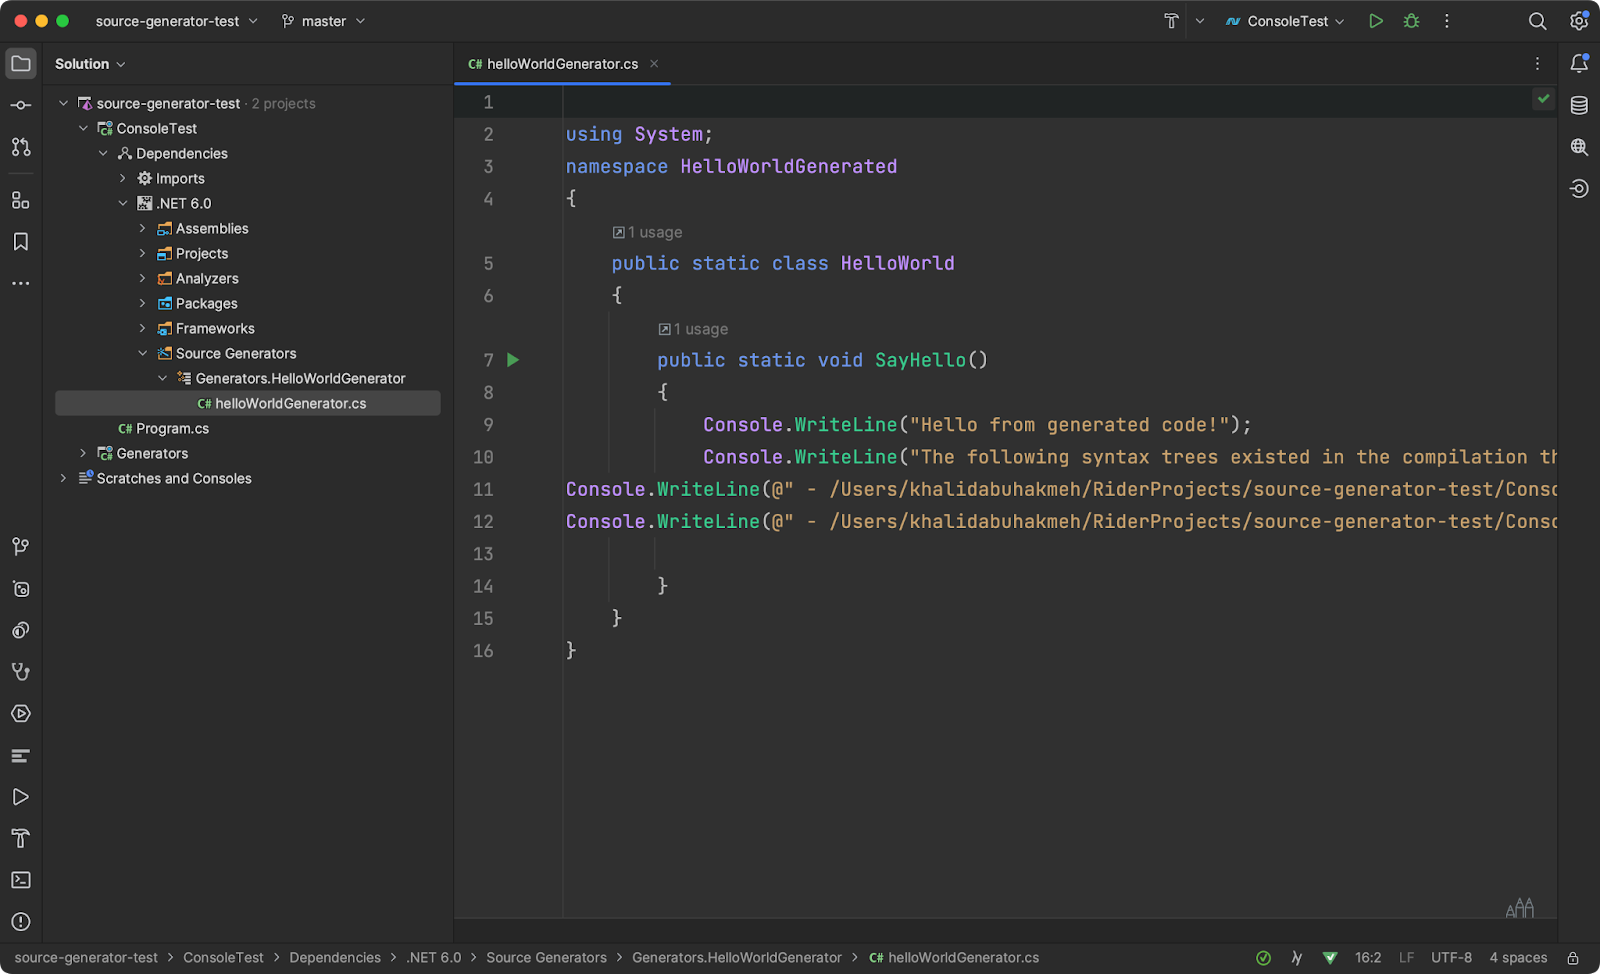 Viewing source generated code in JetBrains Rider